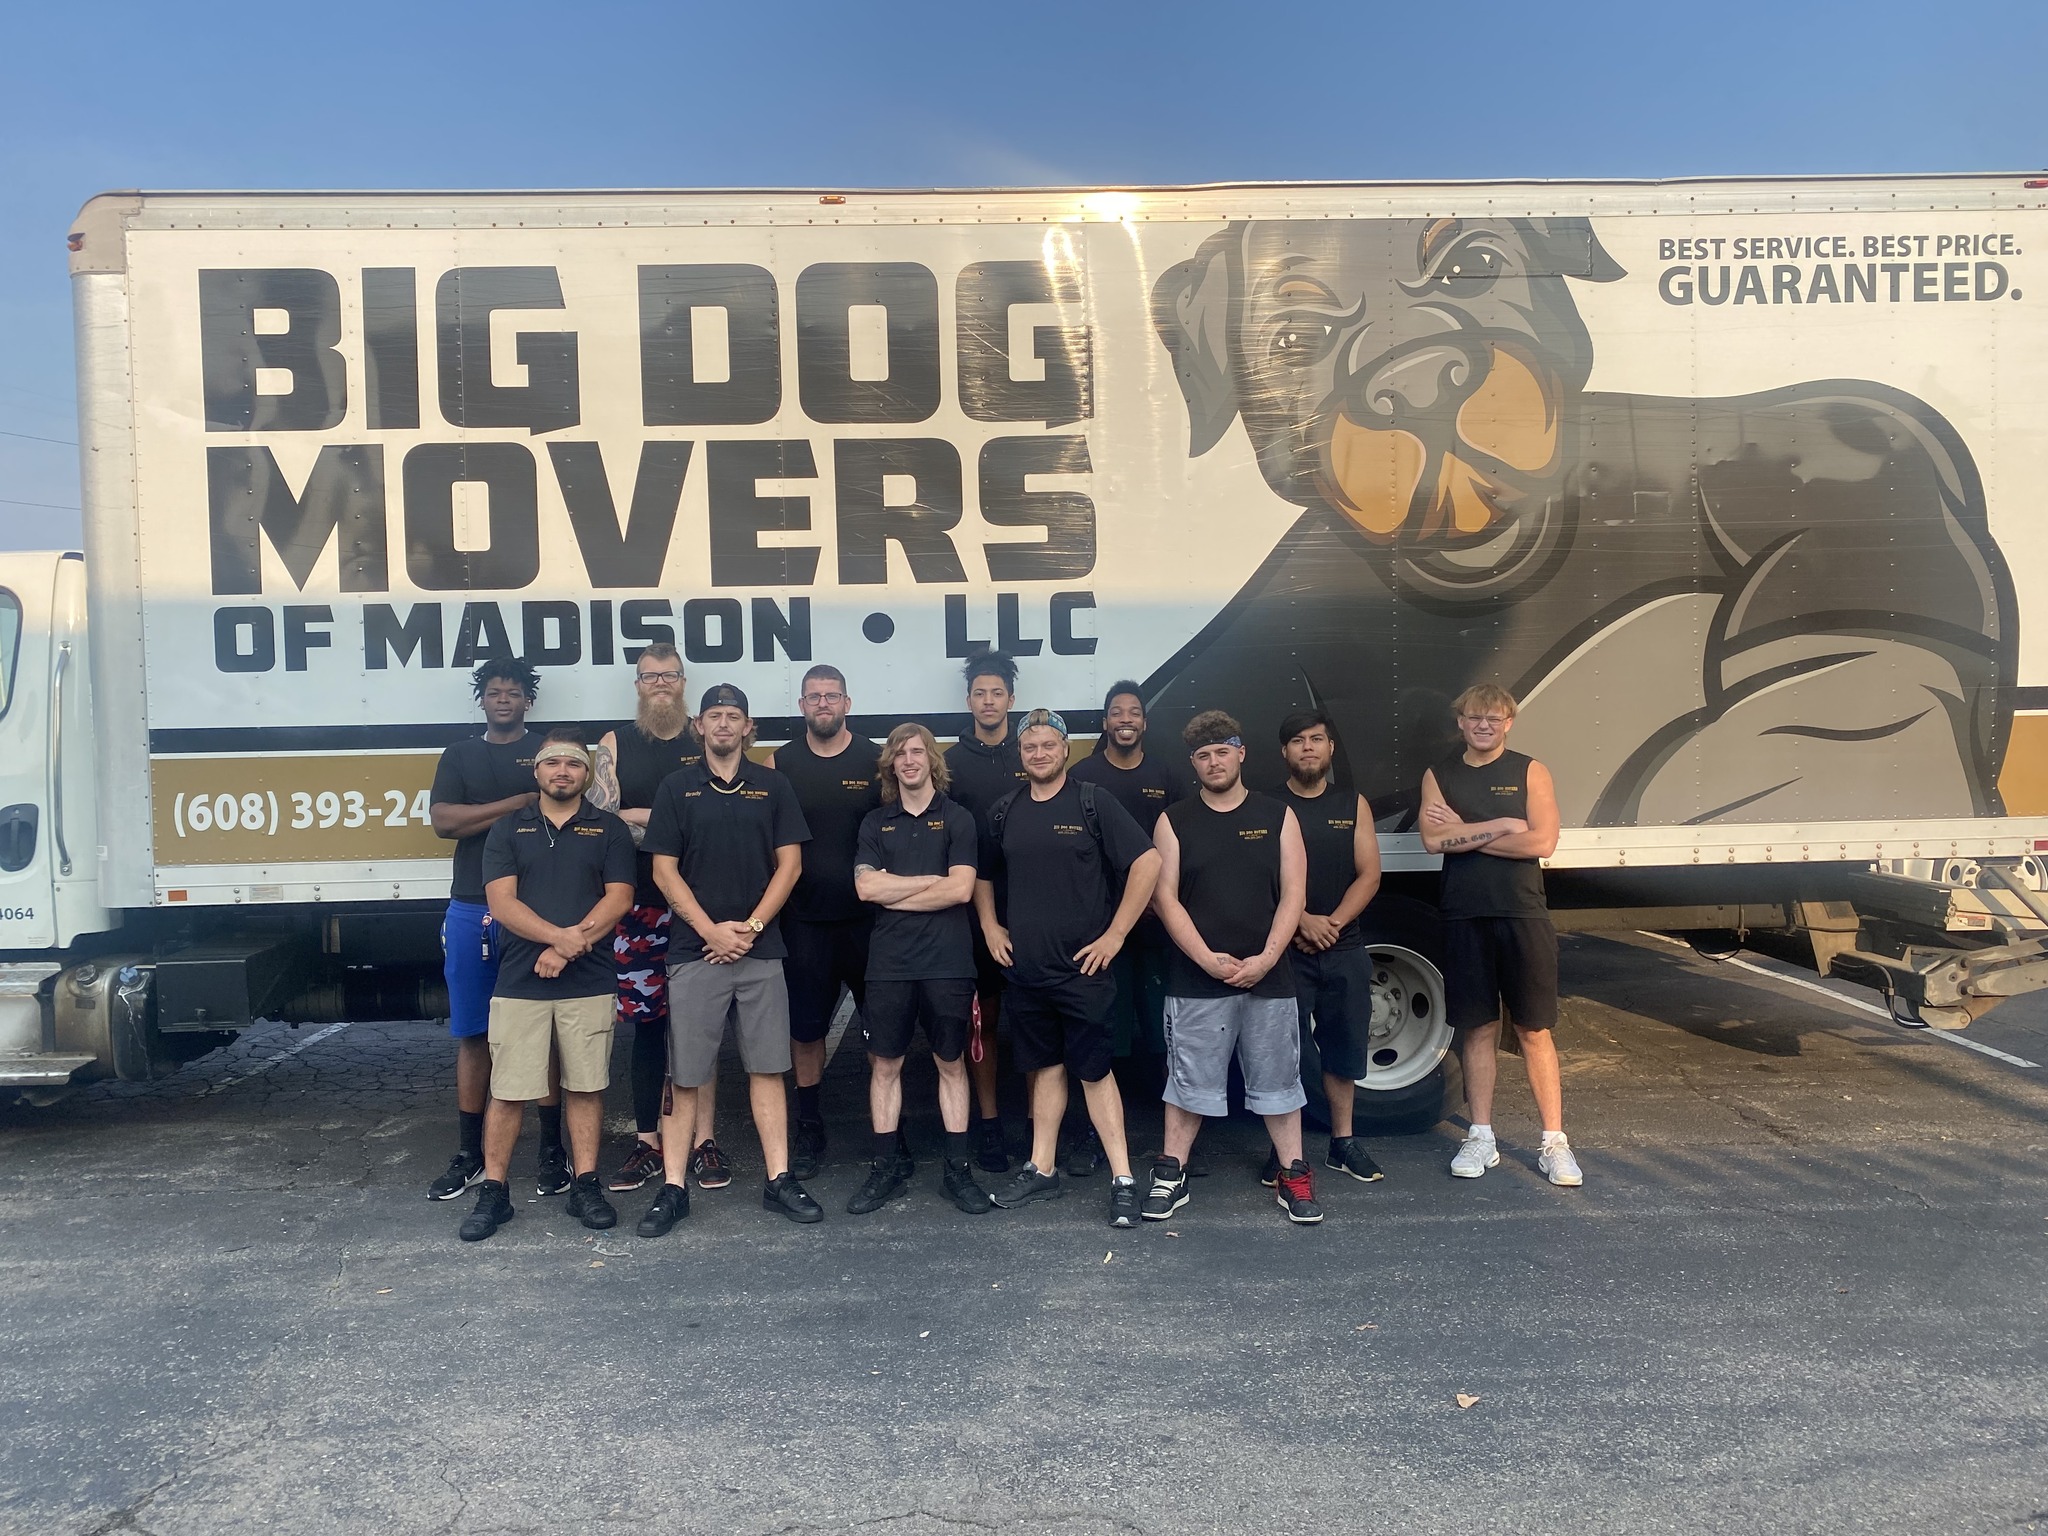 Big Dog Movers of Madison LLC Local Movers in Madison